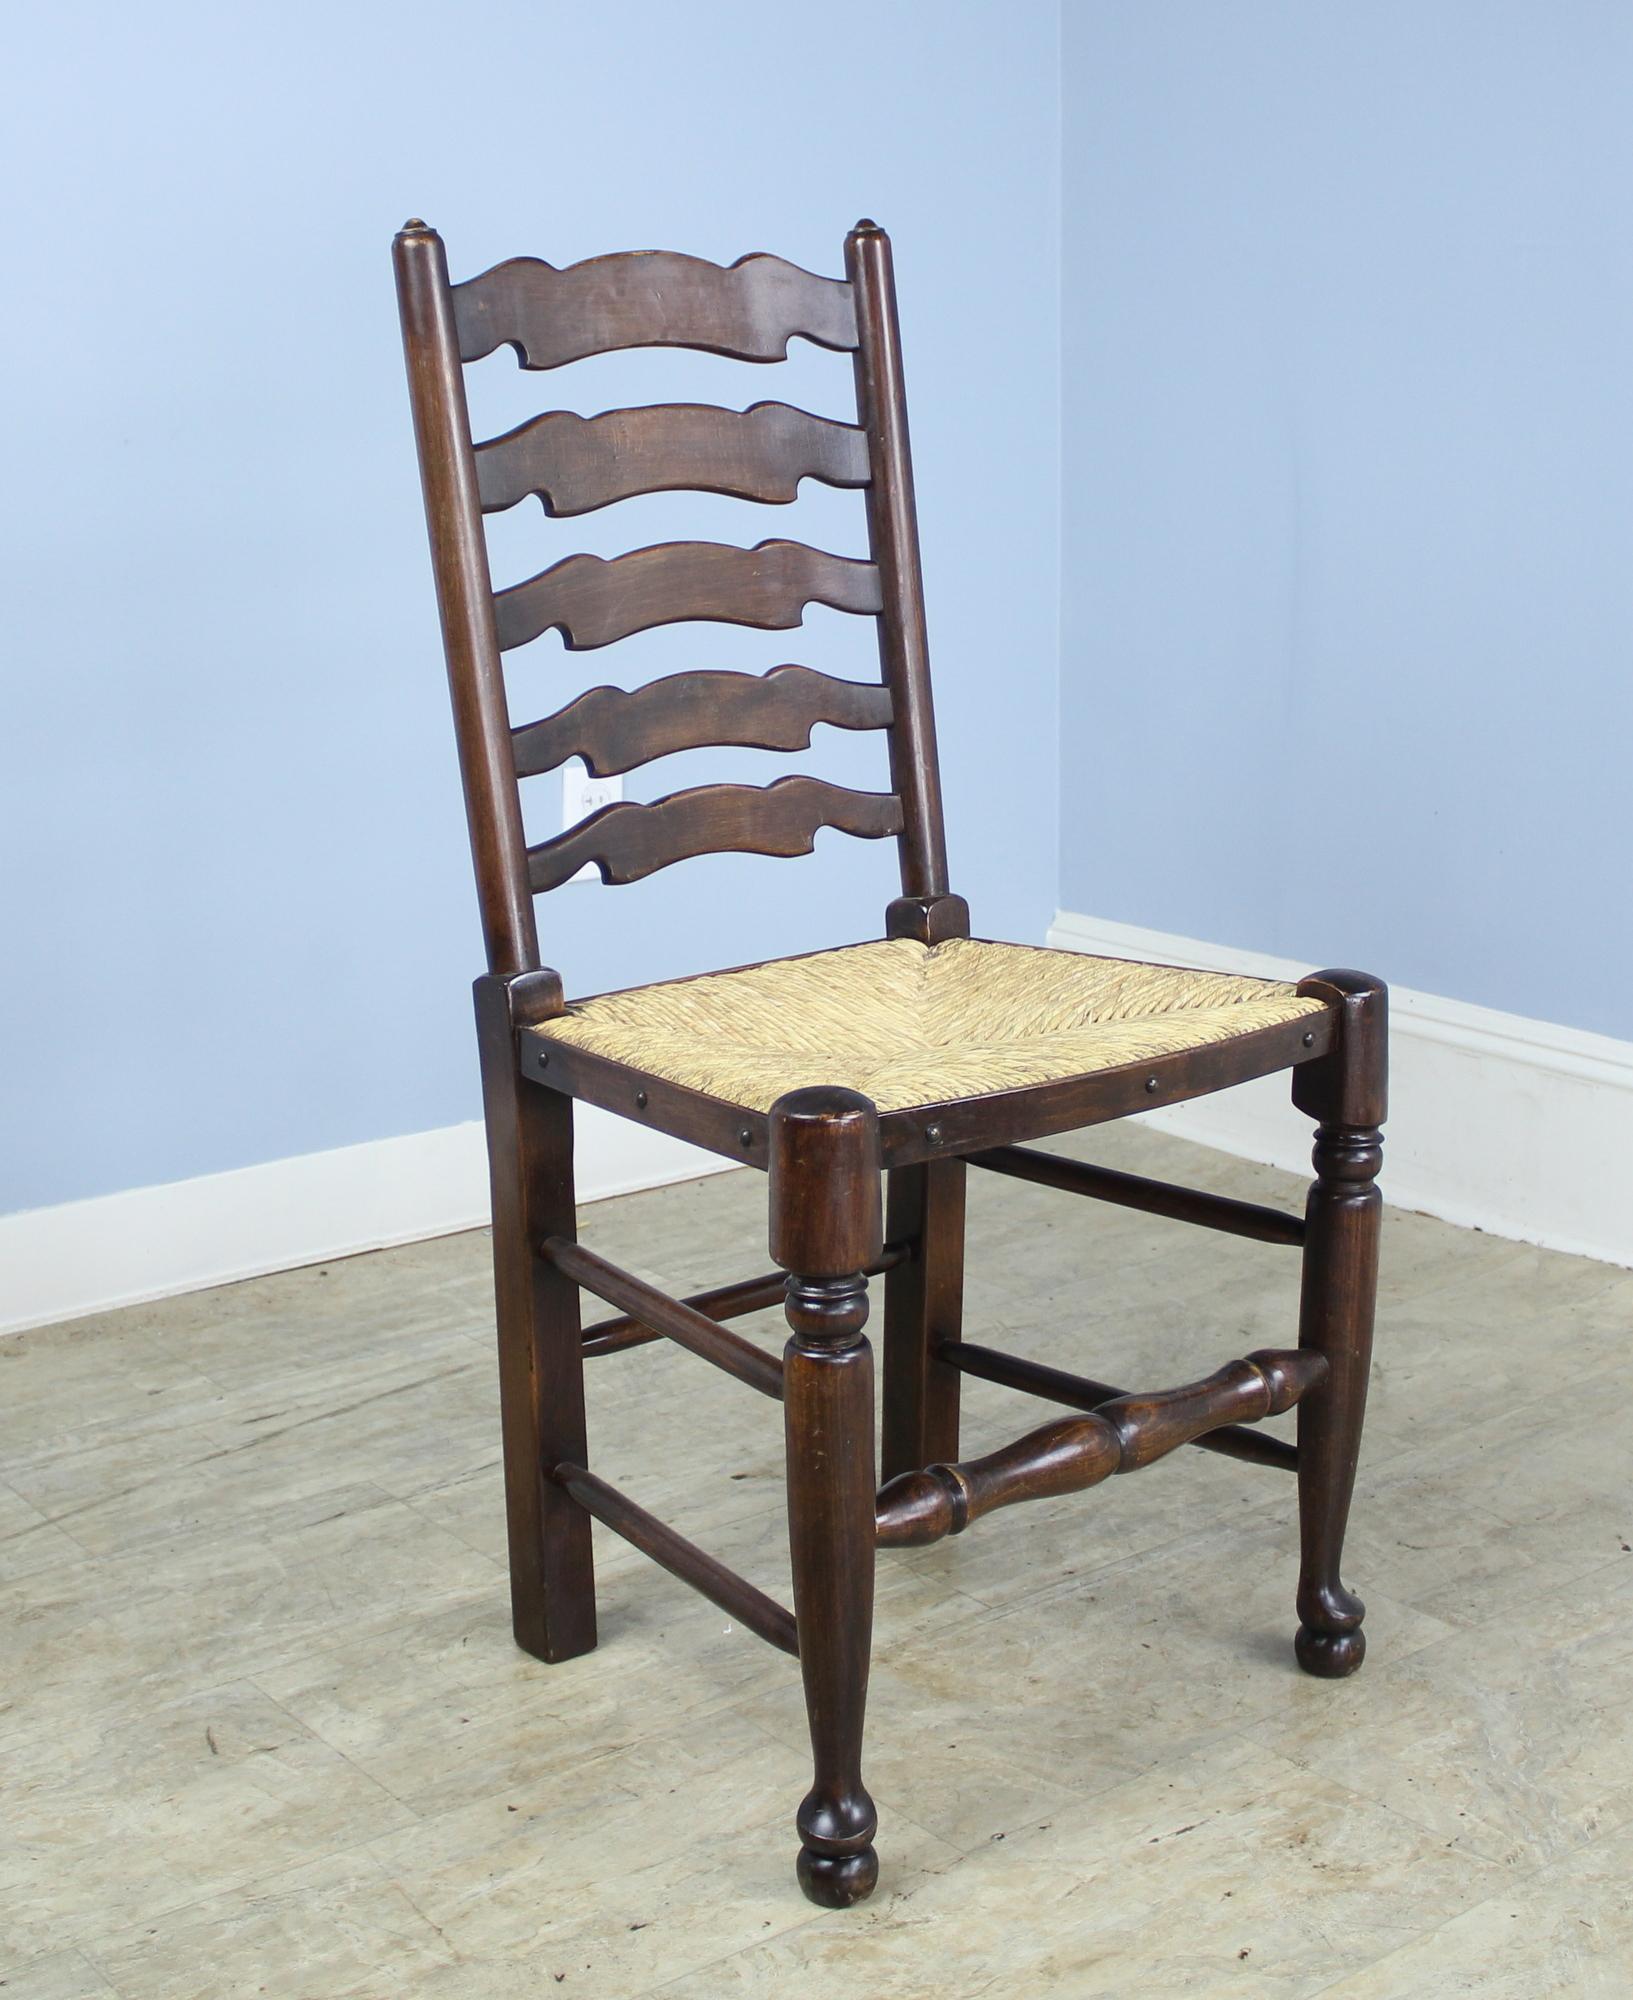 An elegant country look. Set of two arm and six side English wavy back ladder chairs in dark oak. The rush is in good antique condition, and the chairs are quite comfortable as the backs have a slight recline. Interesting bullet motif around the